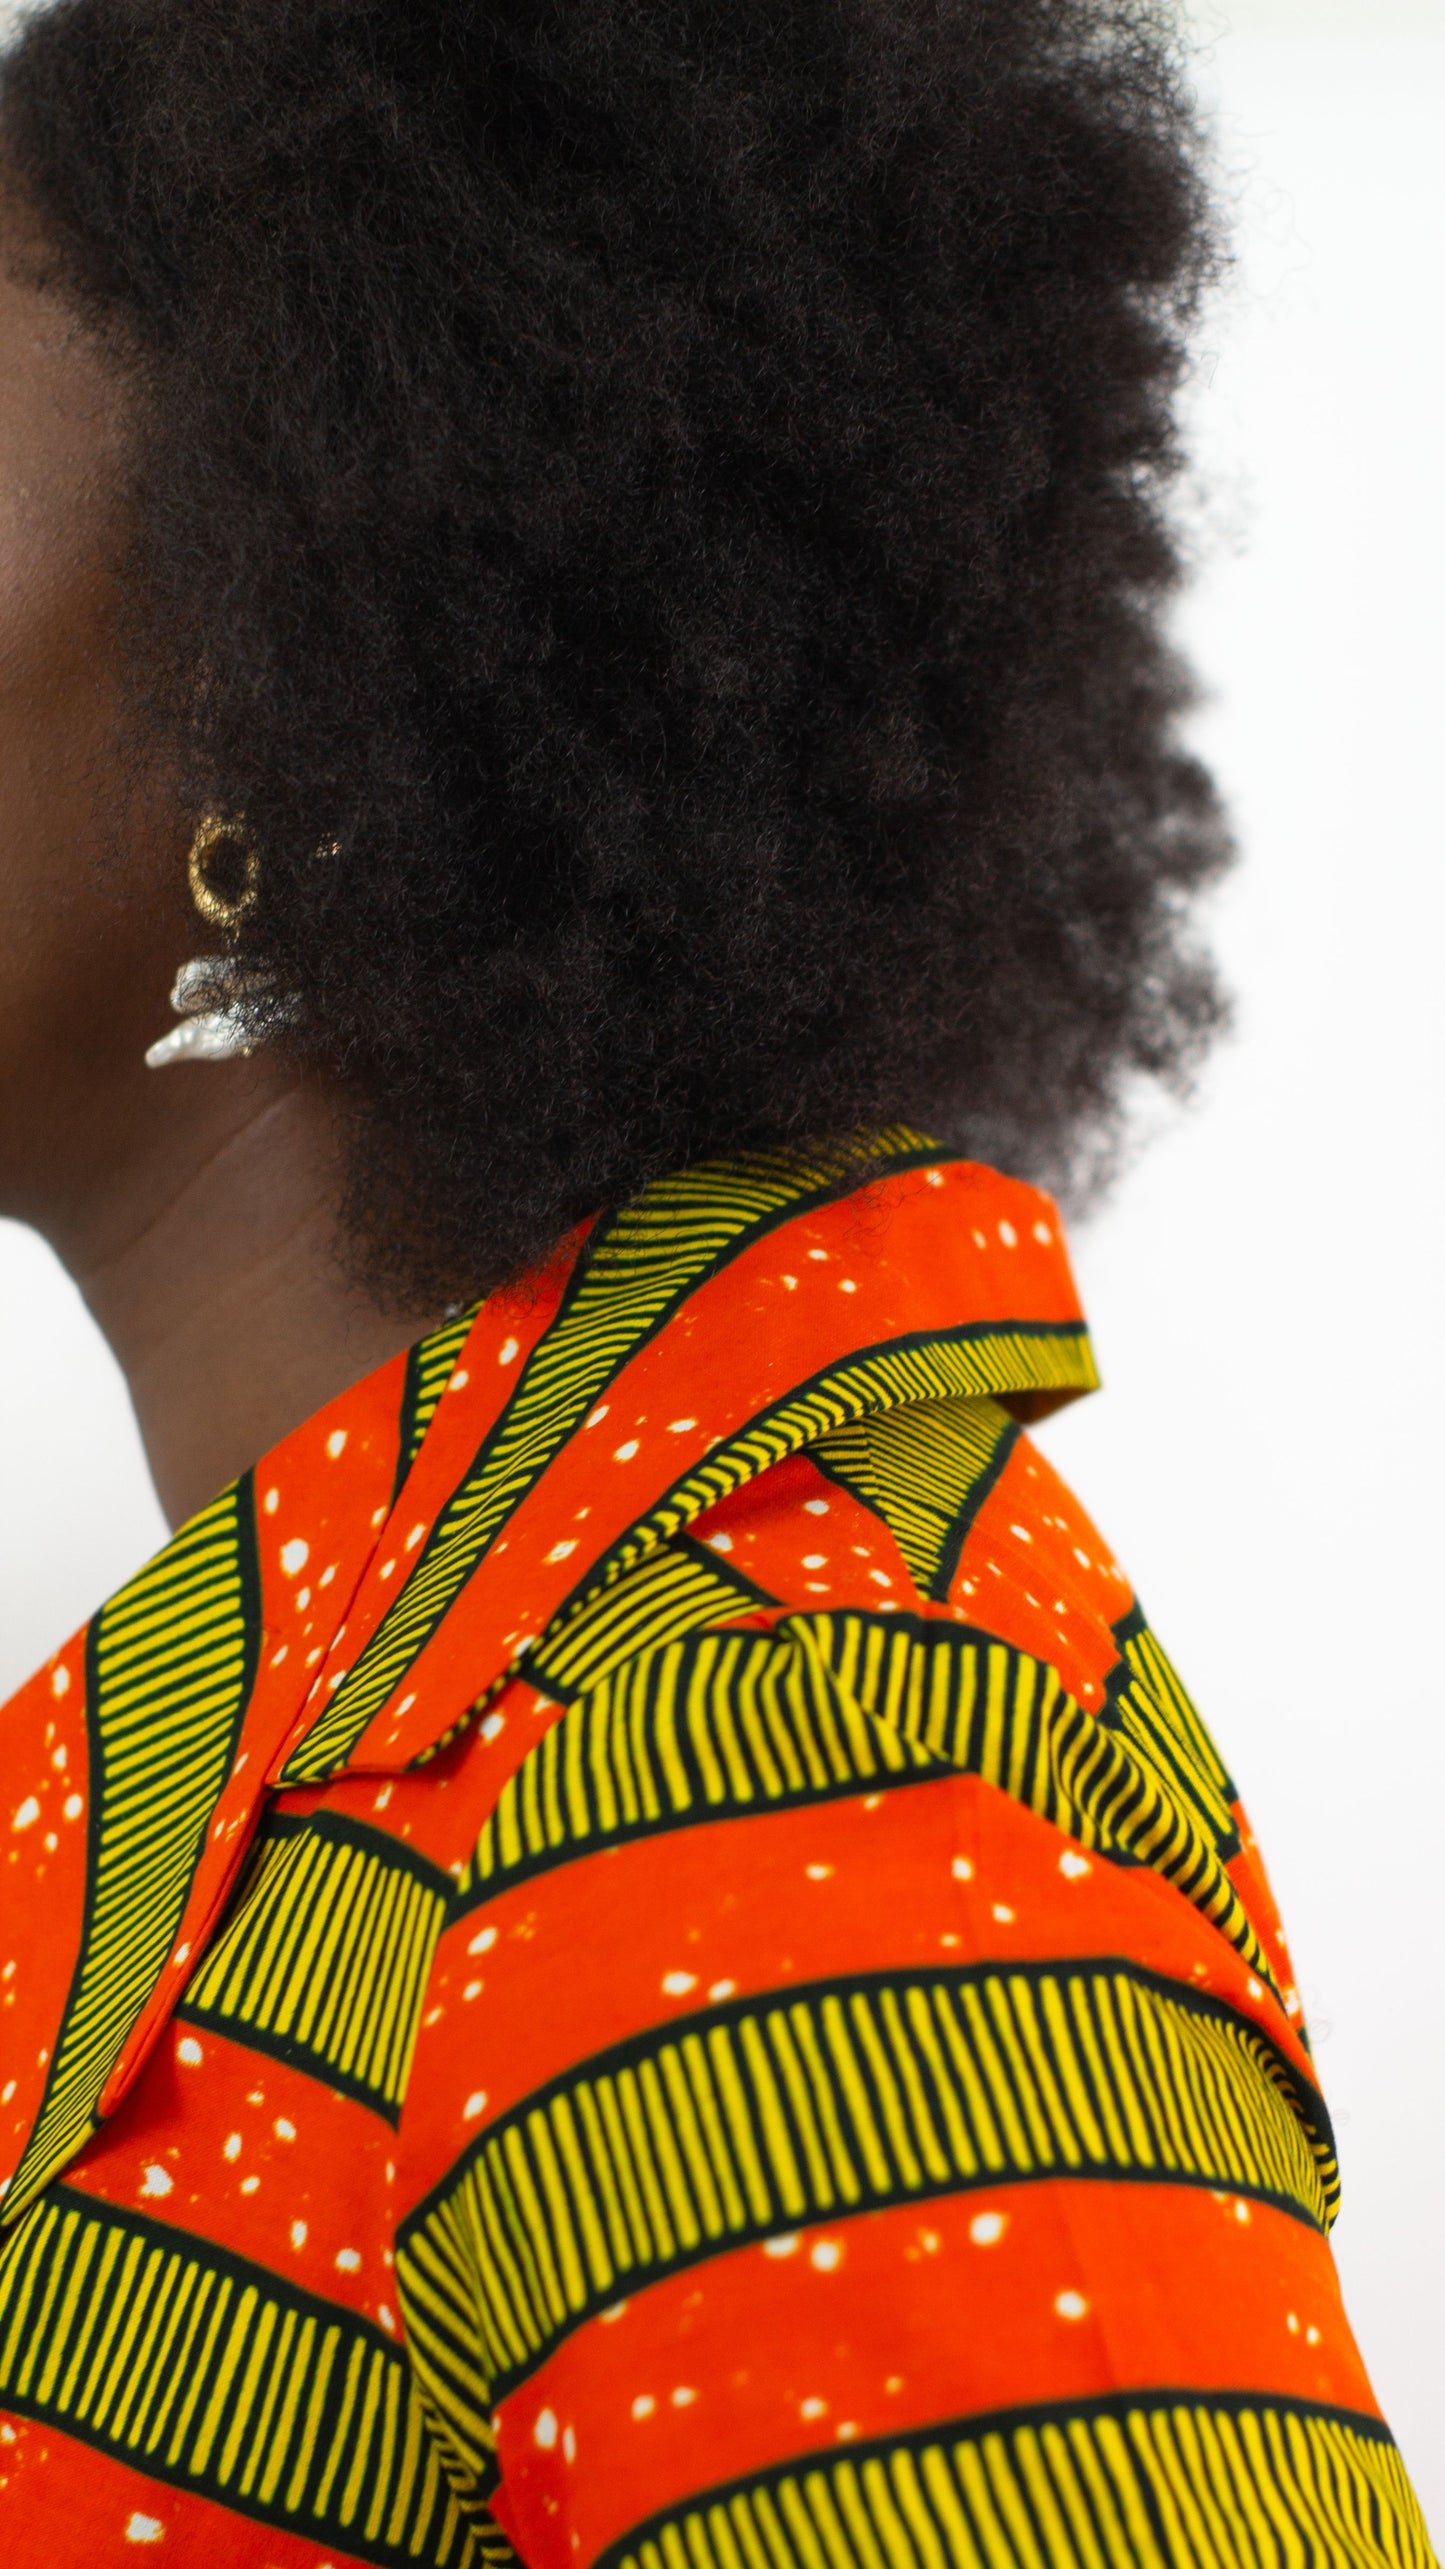 A close-up view capturing the intricate details of a V-neck orange-striped African print dress, paired with golden earrings.